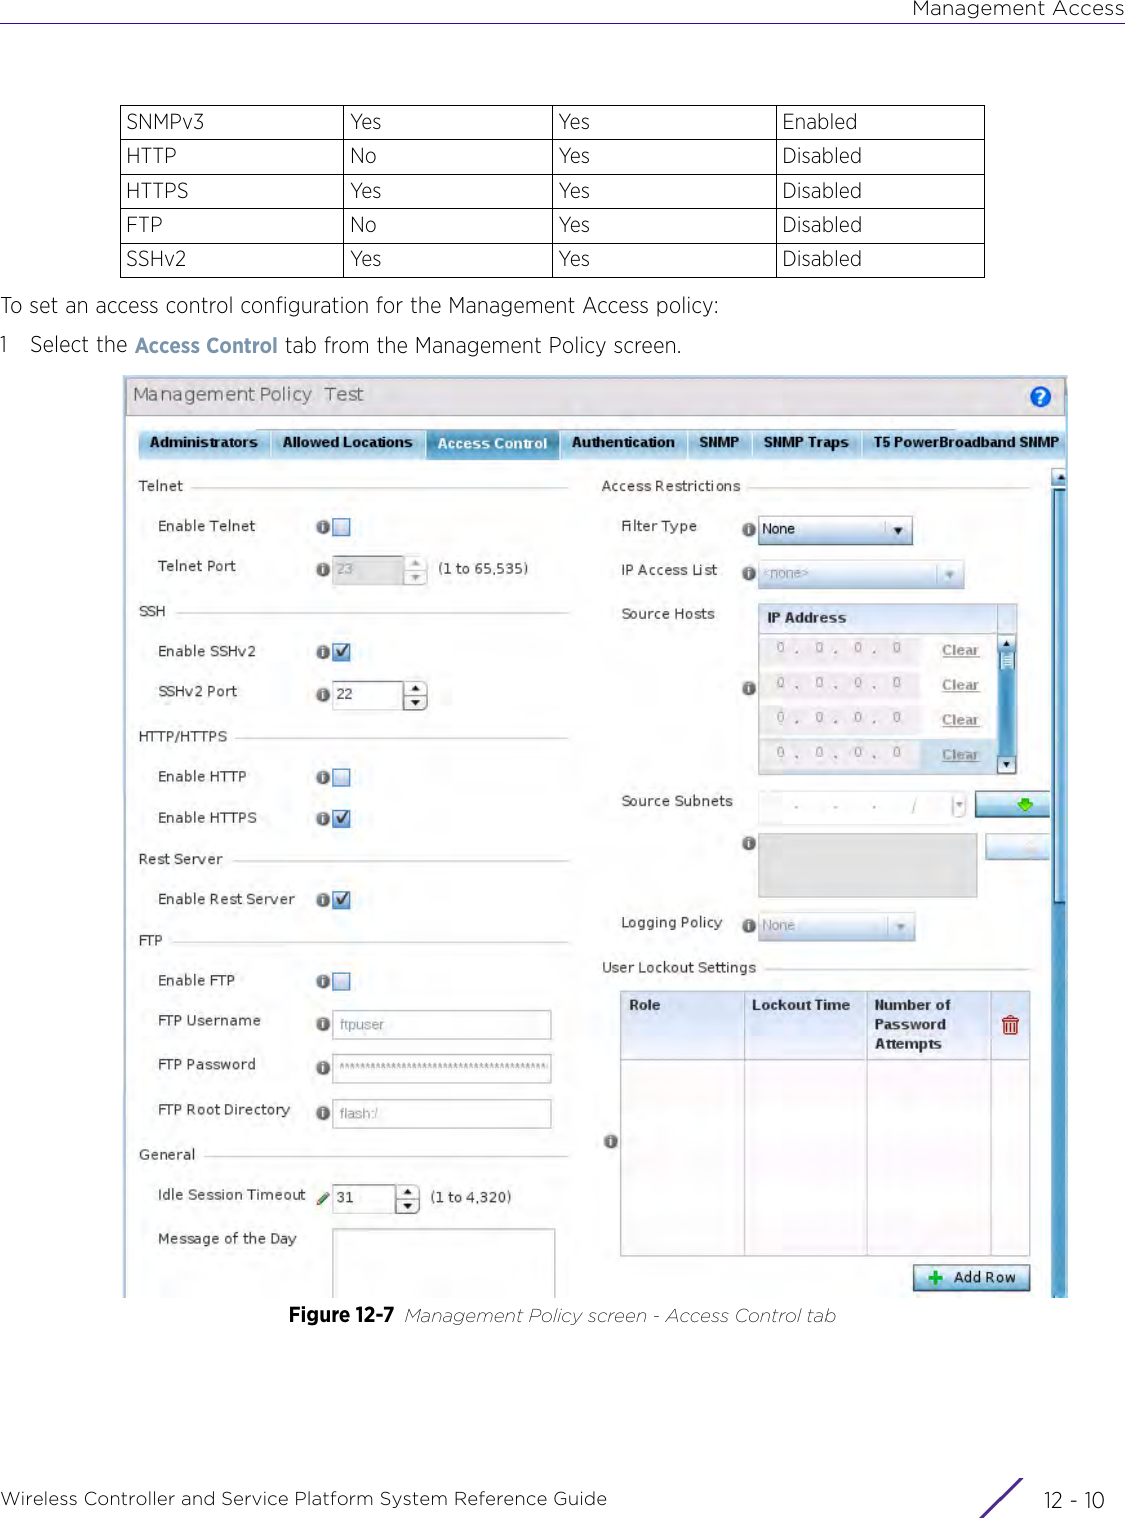 Management AccessWireless Controller and Service Platform System Reference Guide  12 - 10To set an access control configuration for the Management Access policy:1 Select the Access Control tab from the Management Policy screen.Figure 12-7 Management Policy screen - Access Control tabSNMPv3 Yes Yes EnabledHTTP No Yes DisabledHTTPS Yes Yes DisabledFTP No Yes DisabledSSHv2 Yes Yes Disabled